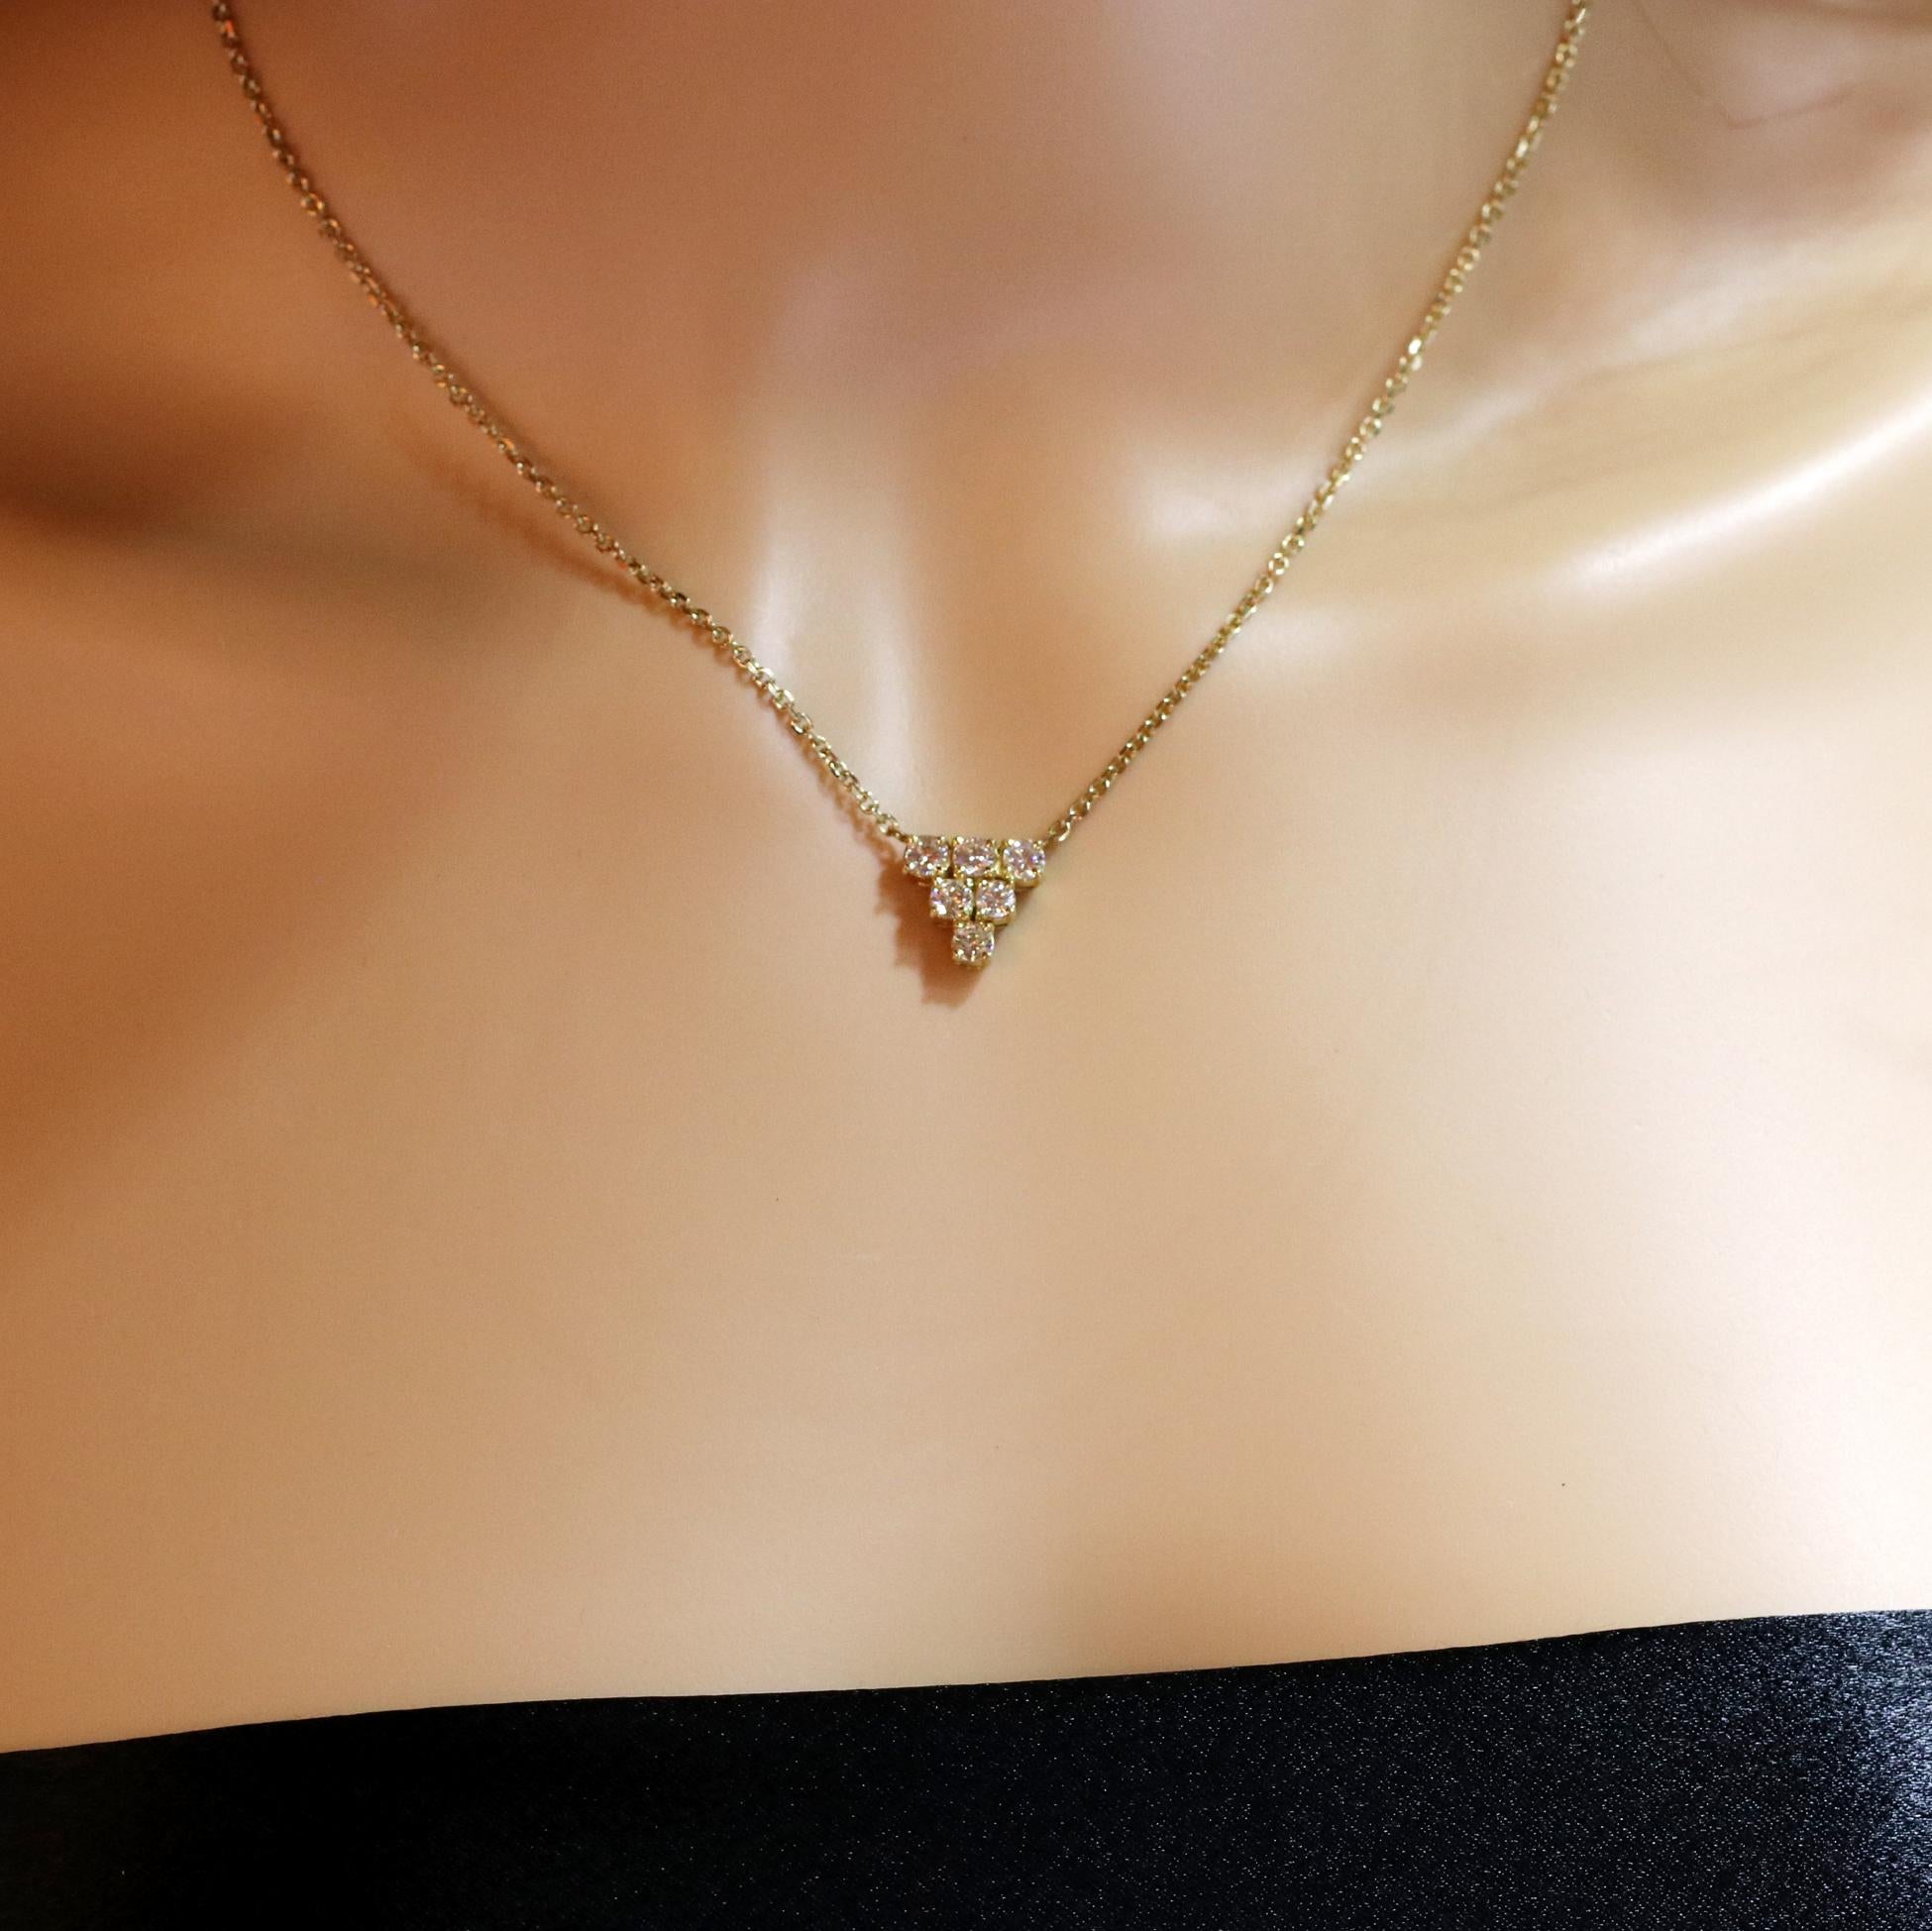 A 14 karat yellow gold necklace measuring 16 inches long, and set with 6 round brilliant cut diamonds weighing 1.15 carats total approximate weight, of overall G color and VS1/VS2 clarity. The necklace is a beautiful diamond cut, cable link. Overall